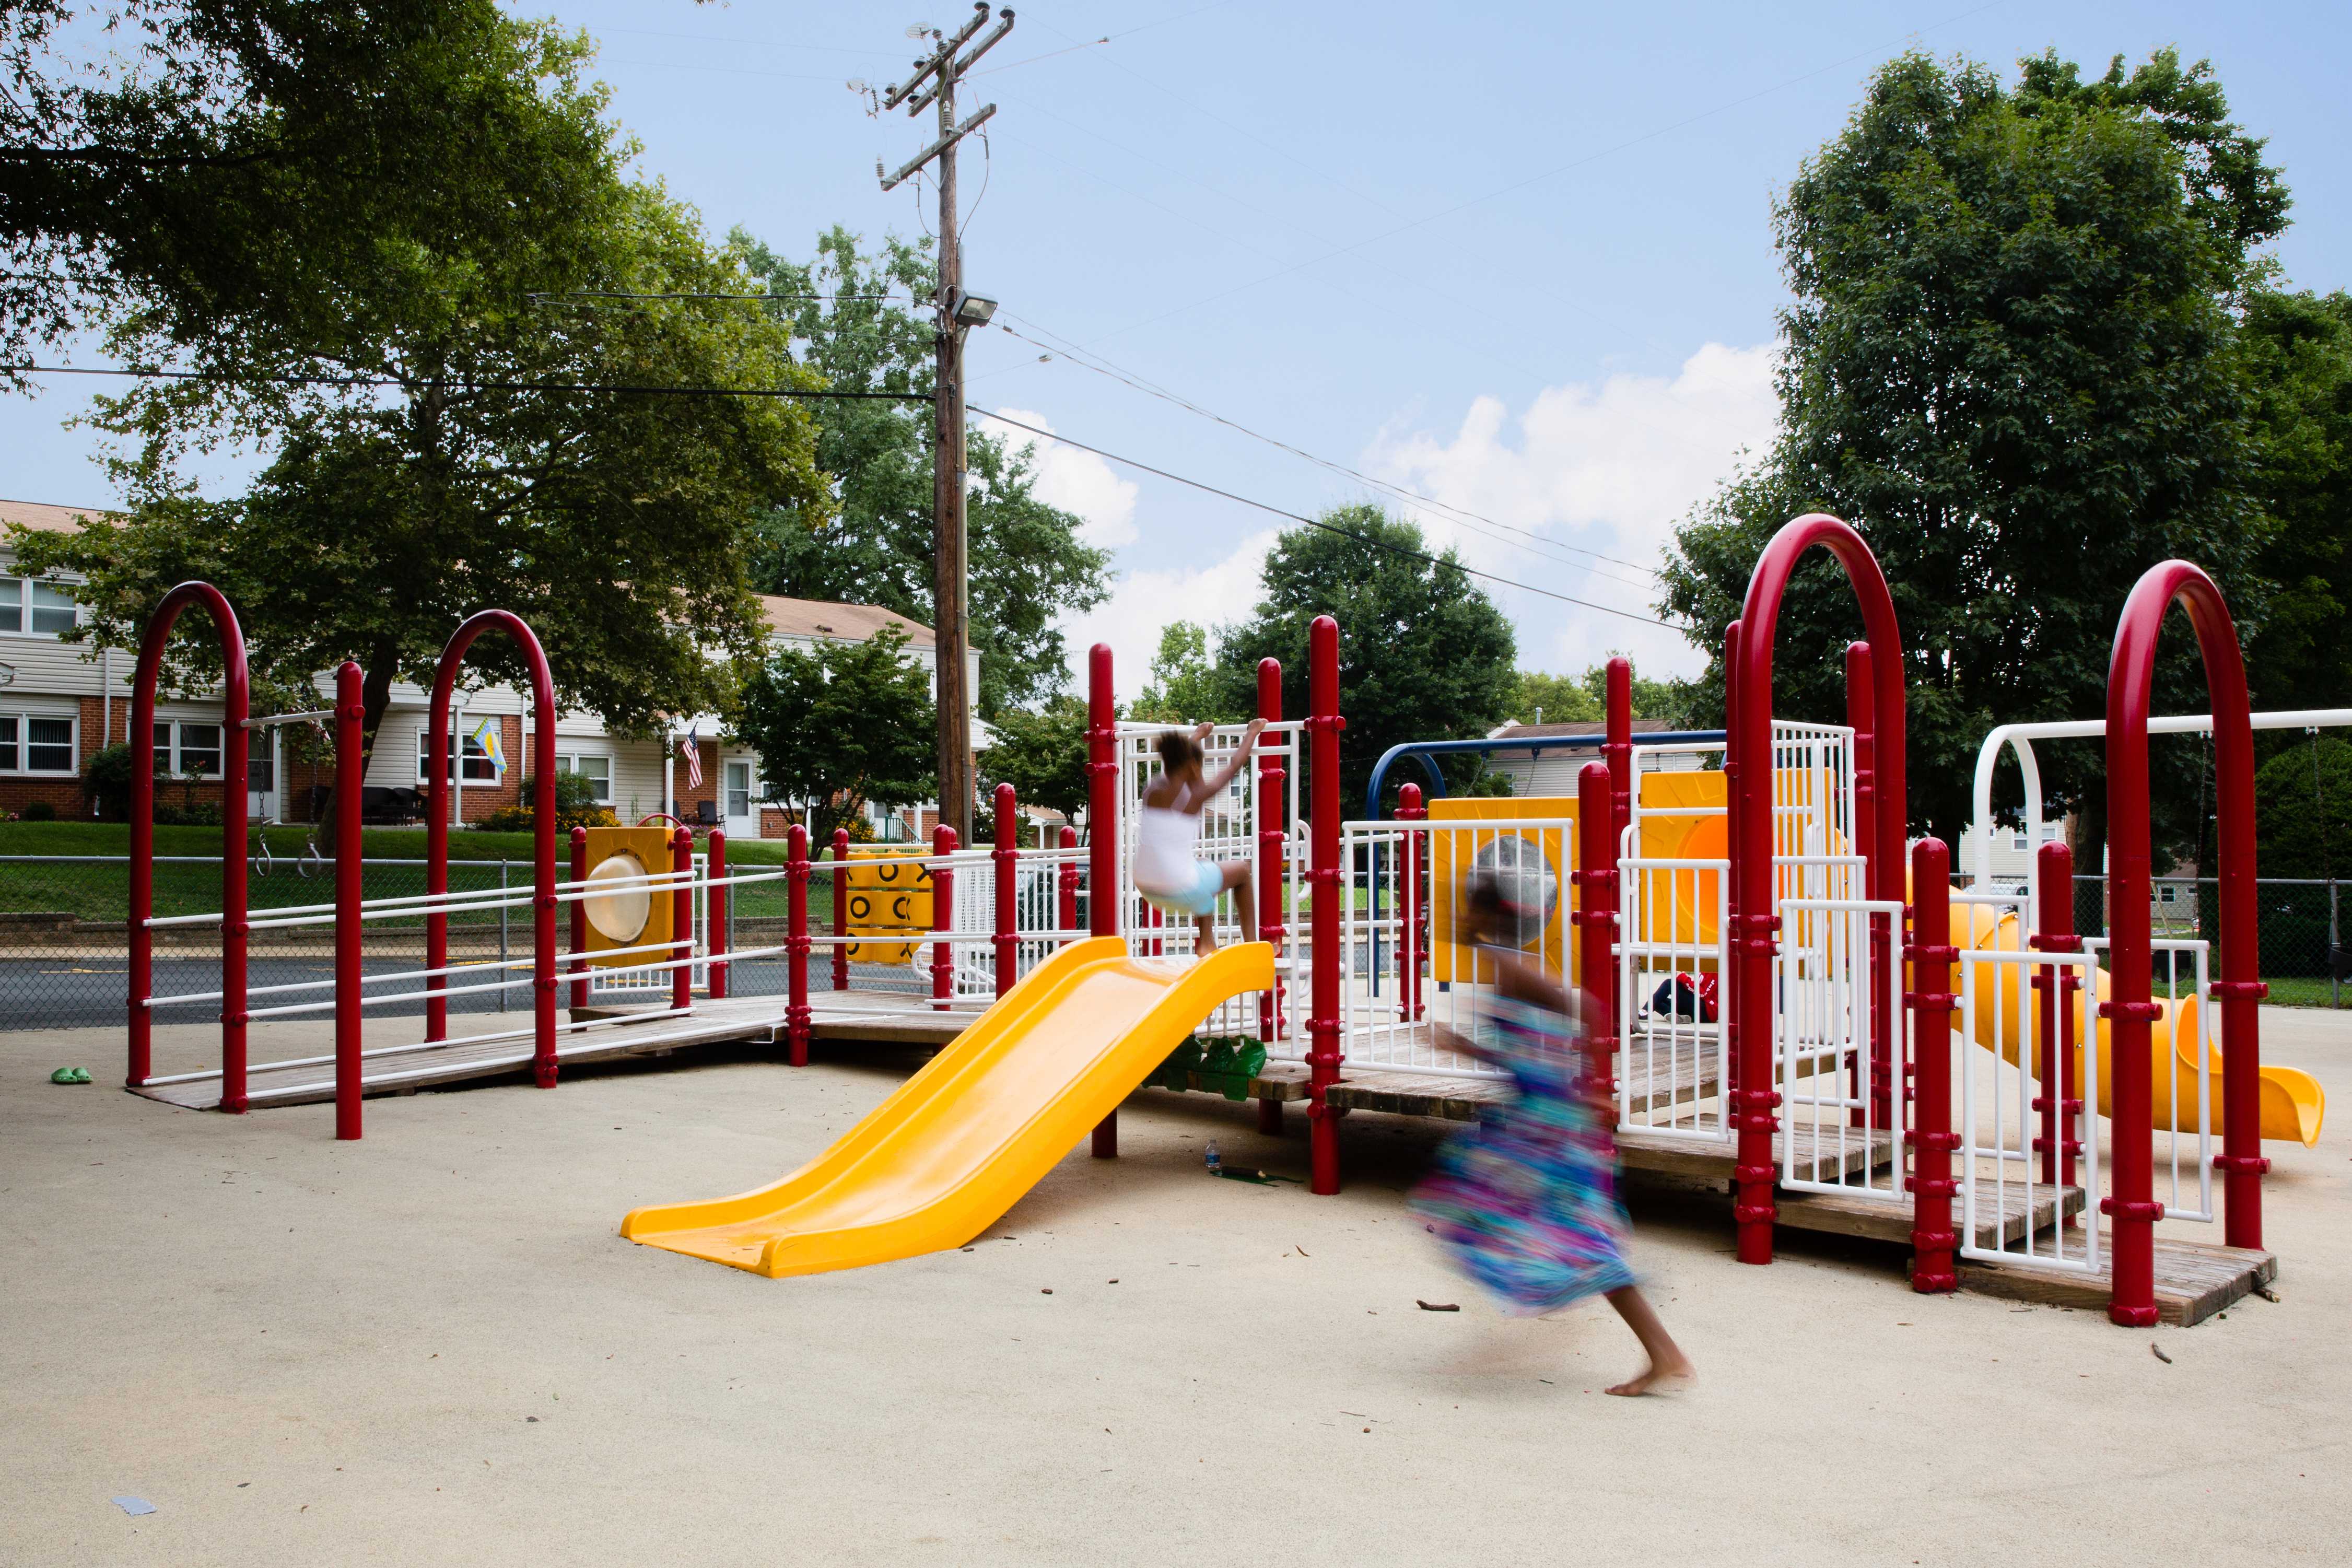 A playground for children at North Severn Village in Annapolis, Maryland